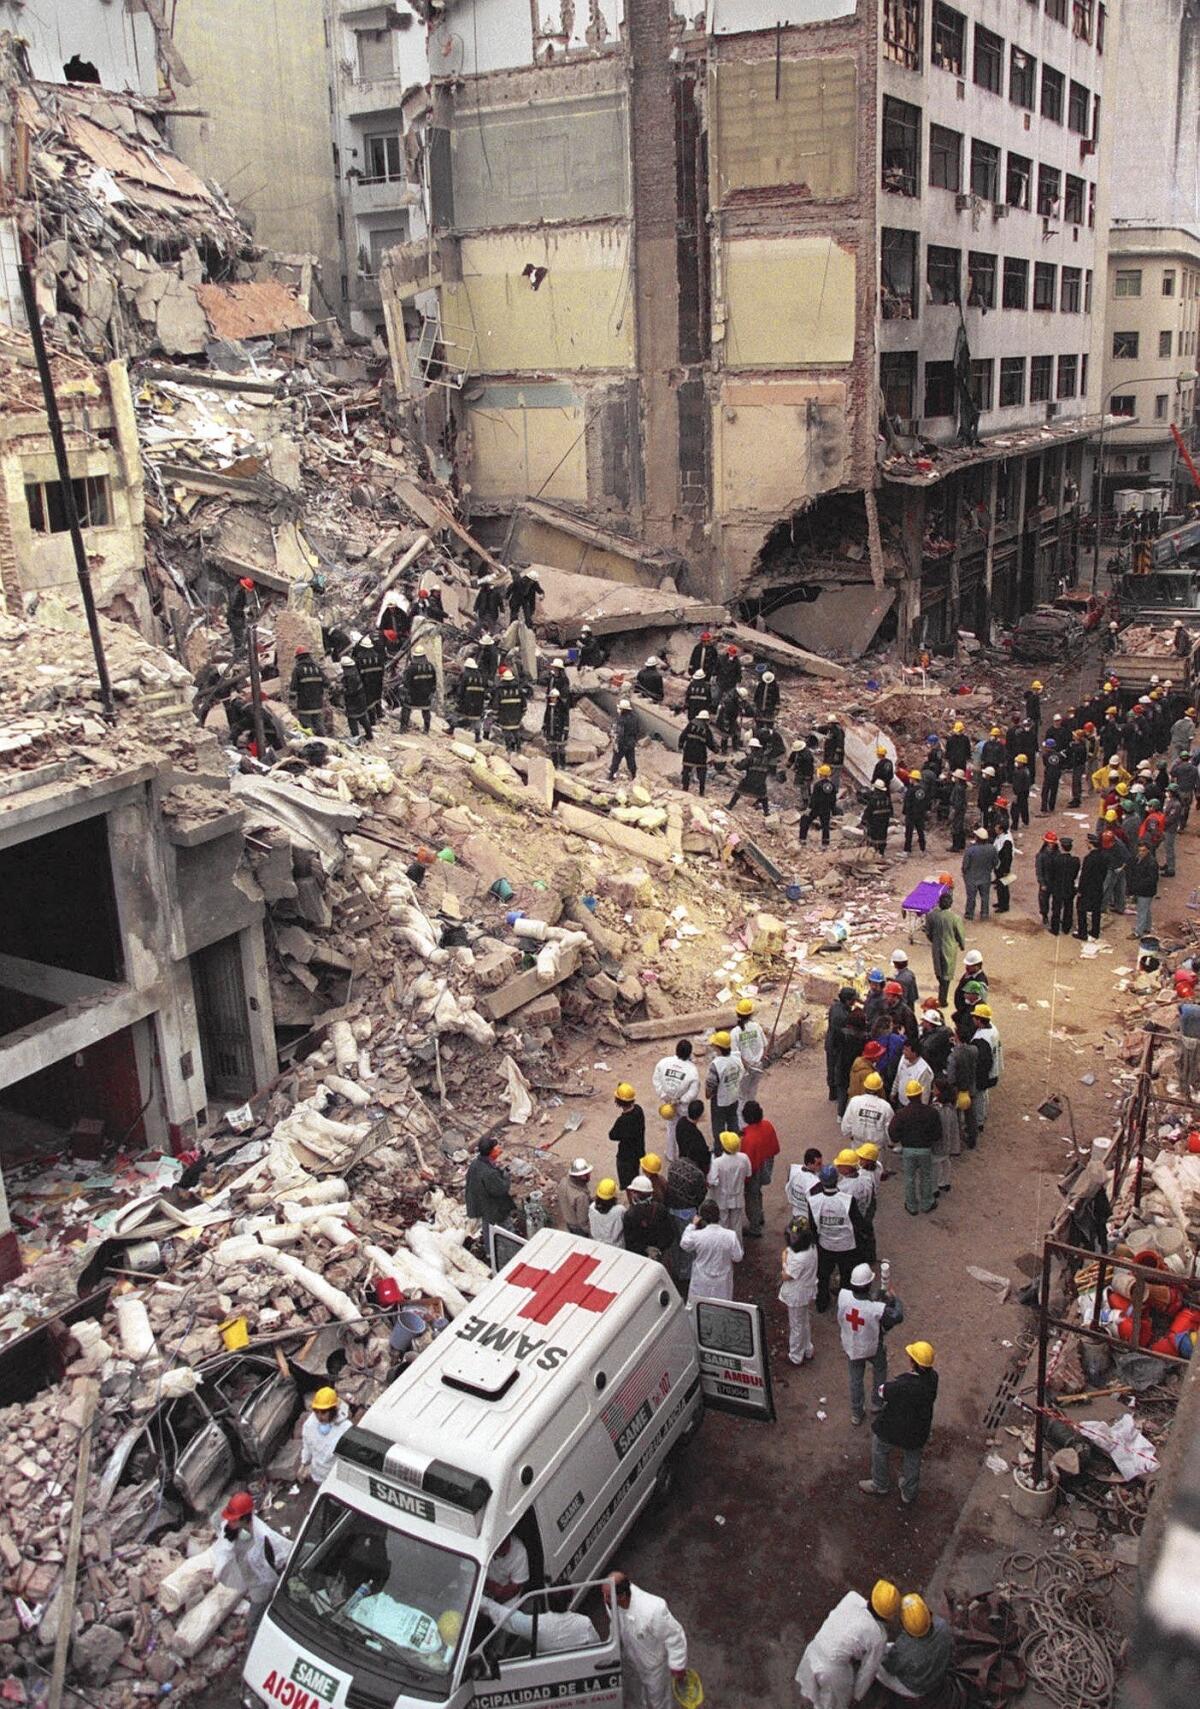 Iran and Hezbollah were accused of the 1994 bombing of a Jewish community center in Buenos Aires.